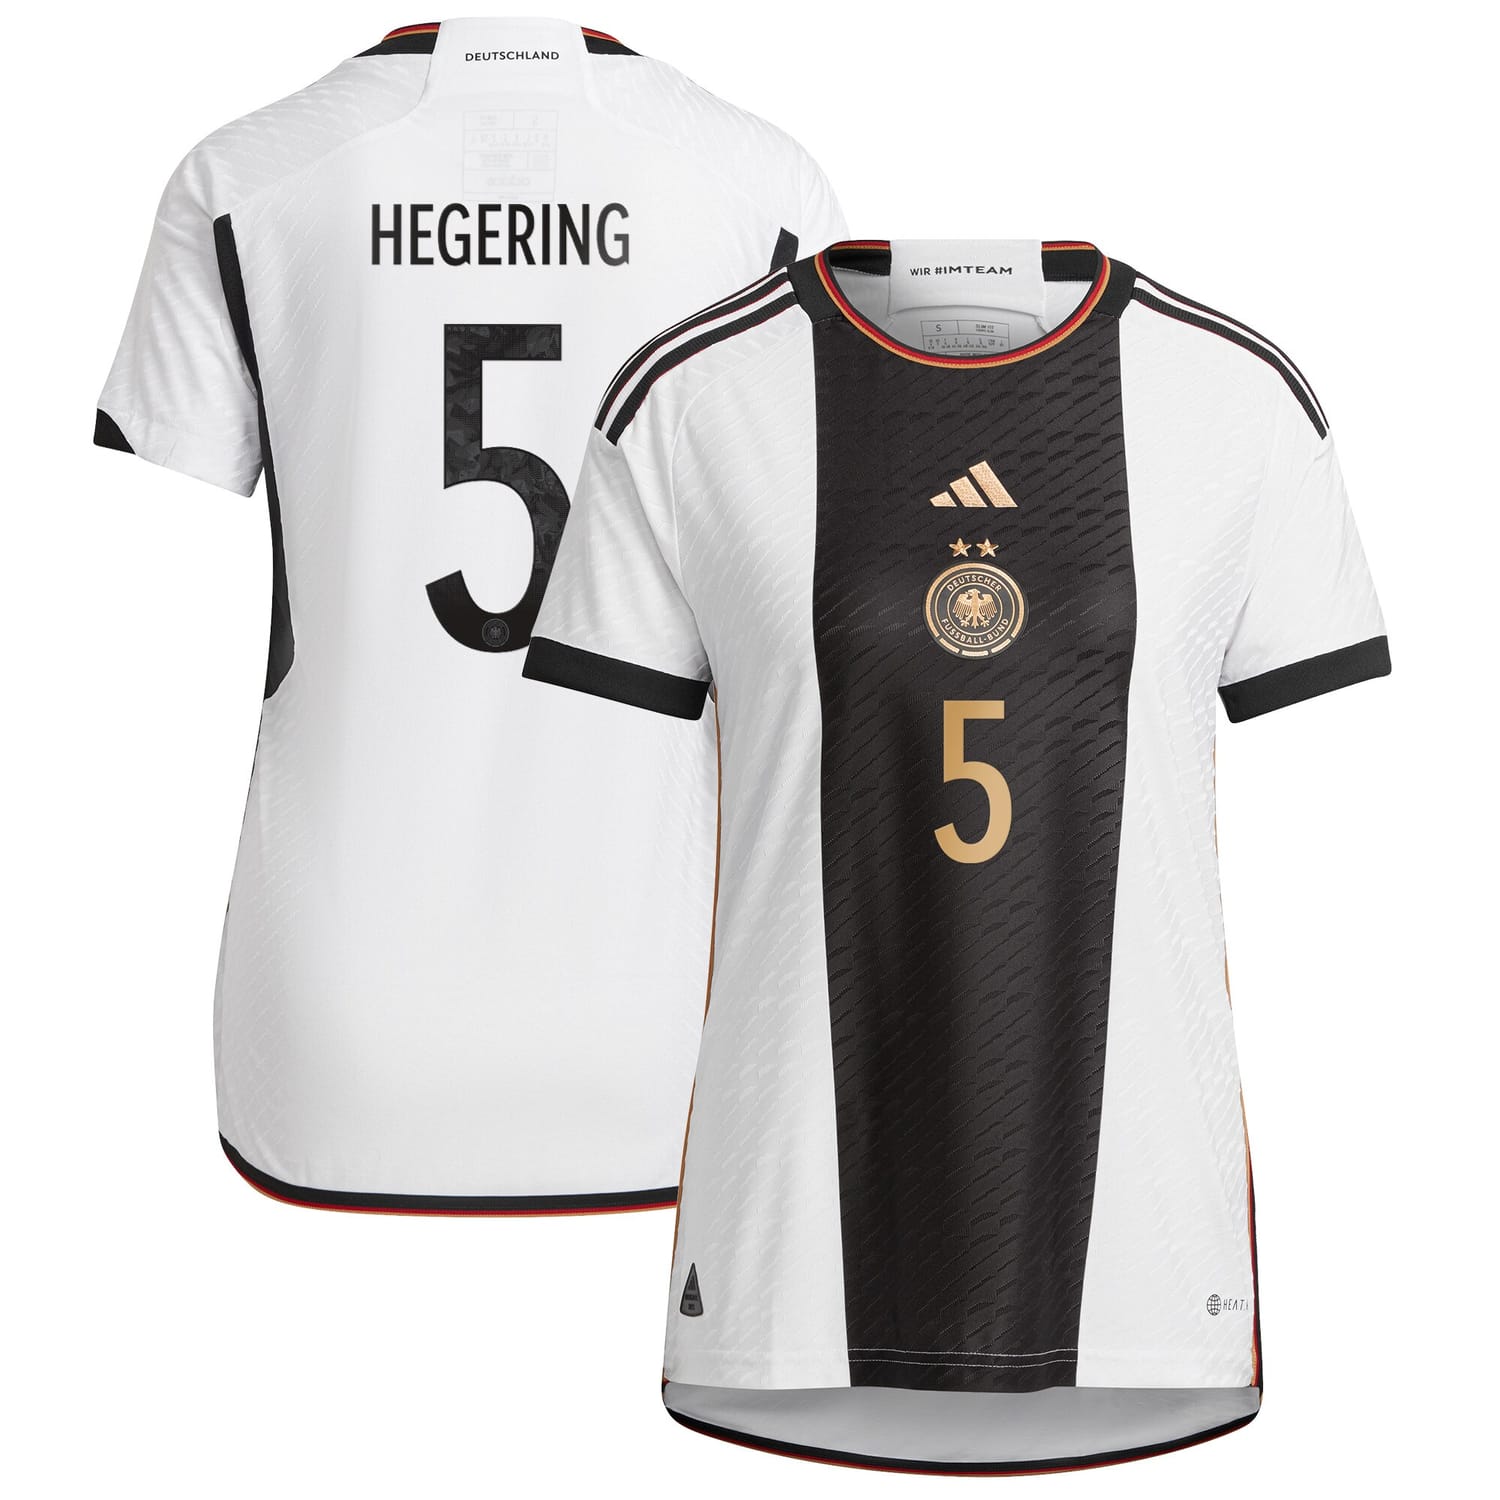 Germany National Team Home Authentic Jersey Shirt player Marina Hegering 5 printing for Women